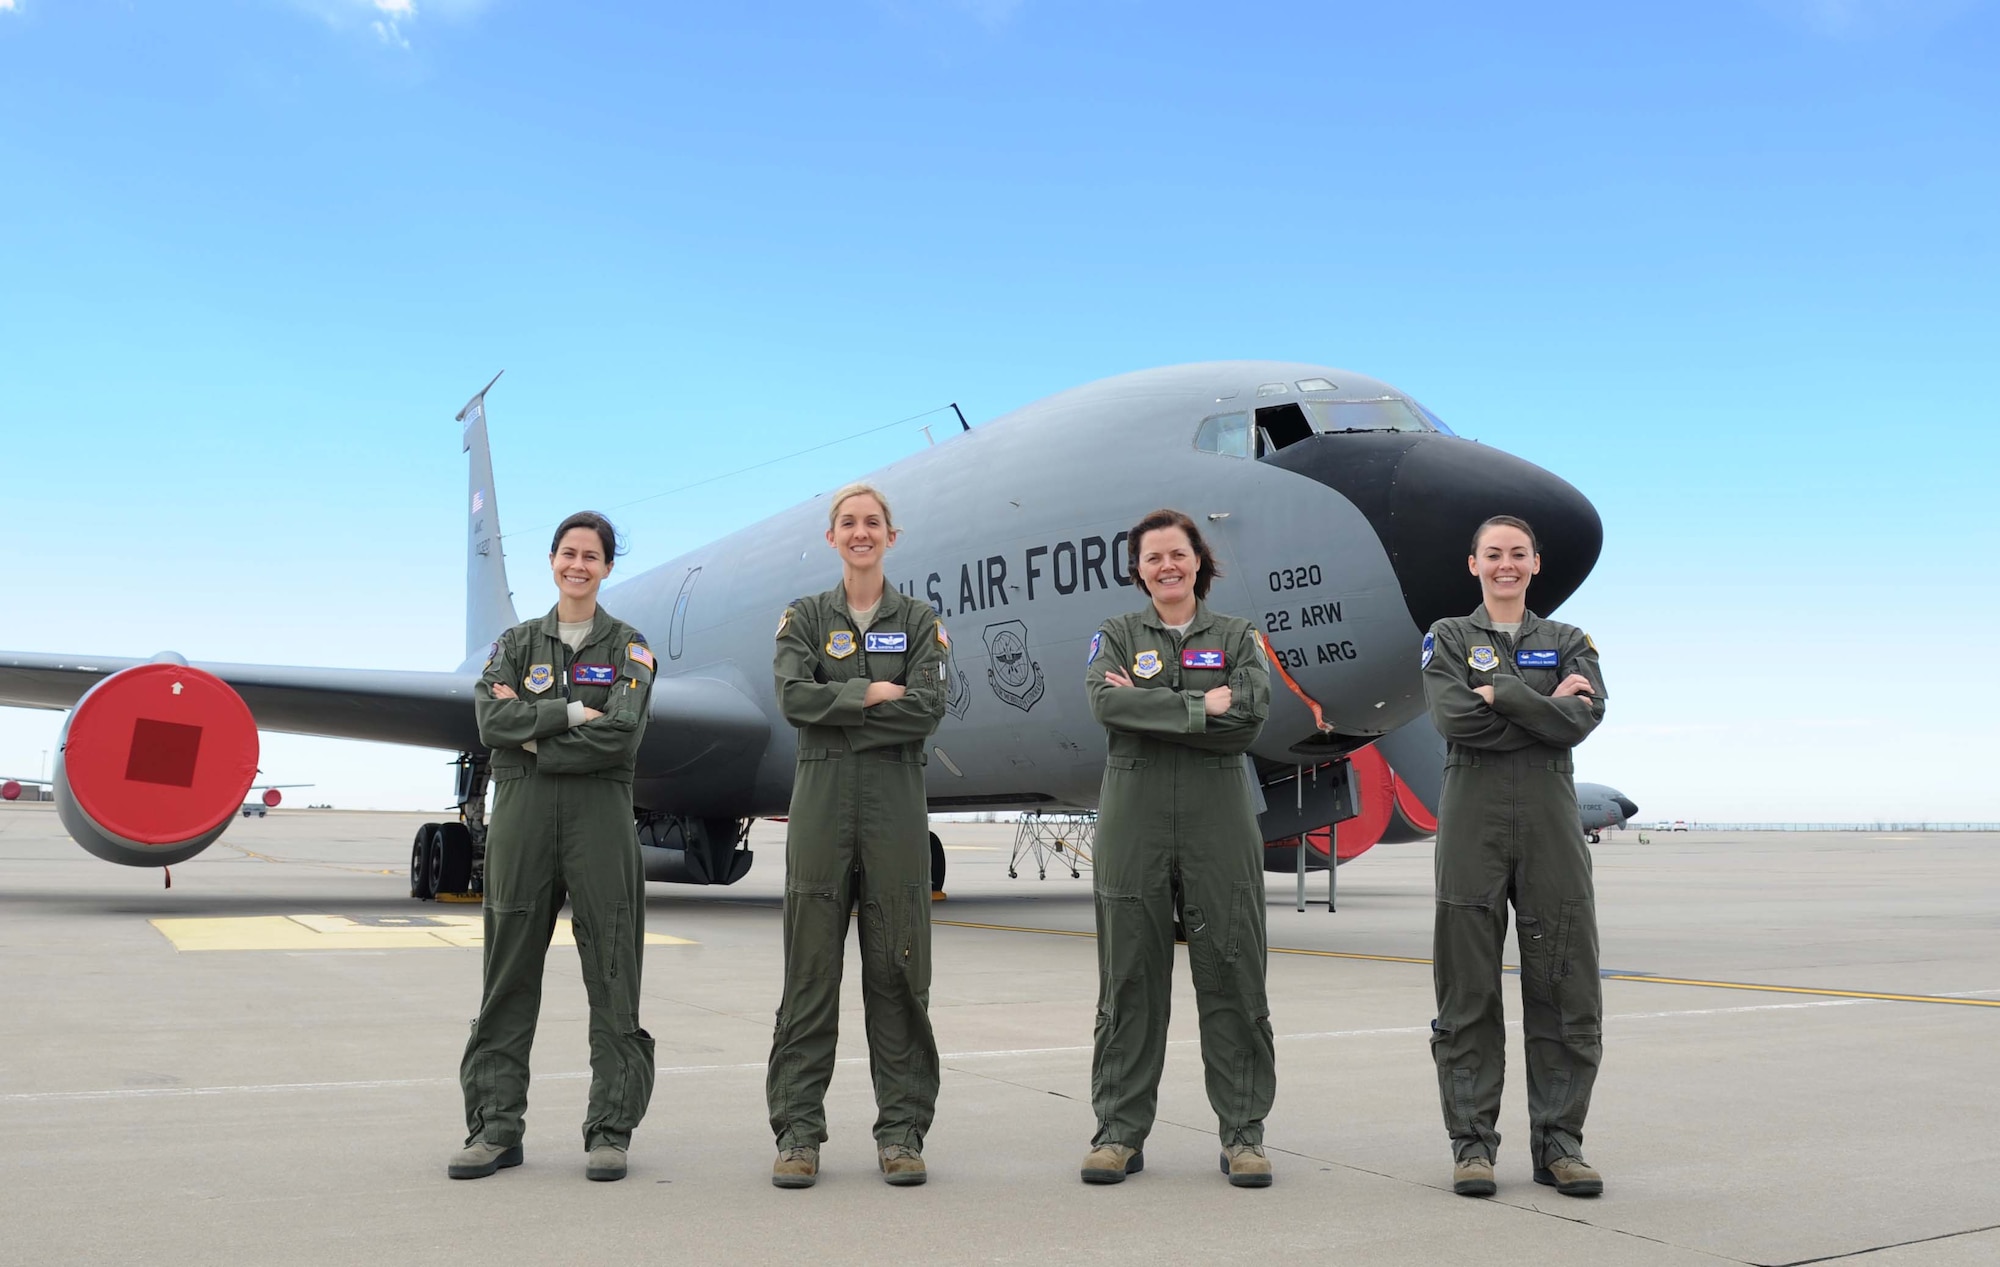 Capt. Rachel Quirarte, 349th Air Refueling Squadron pilot, Maj. Chrystina Jones, 22nd Air Refueling Wing Plans and Programs deputy chief, Lt. Col. Jasmin Silence, 350th Air Refueling Squadron commander, and Staff Sgt. Danielle Warren, boom operator, stand in front of a KC-135 Stratotanker February 23, 2017 at McConnell Air Force Base, Kan.They showcase the career diversity of Team McConnell members. . (U.S. Air Force photo/Senior Airman Tara Fadenrecht)